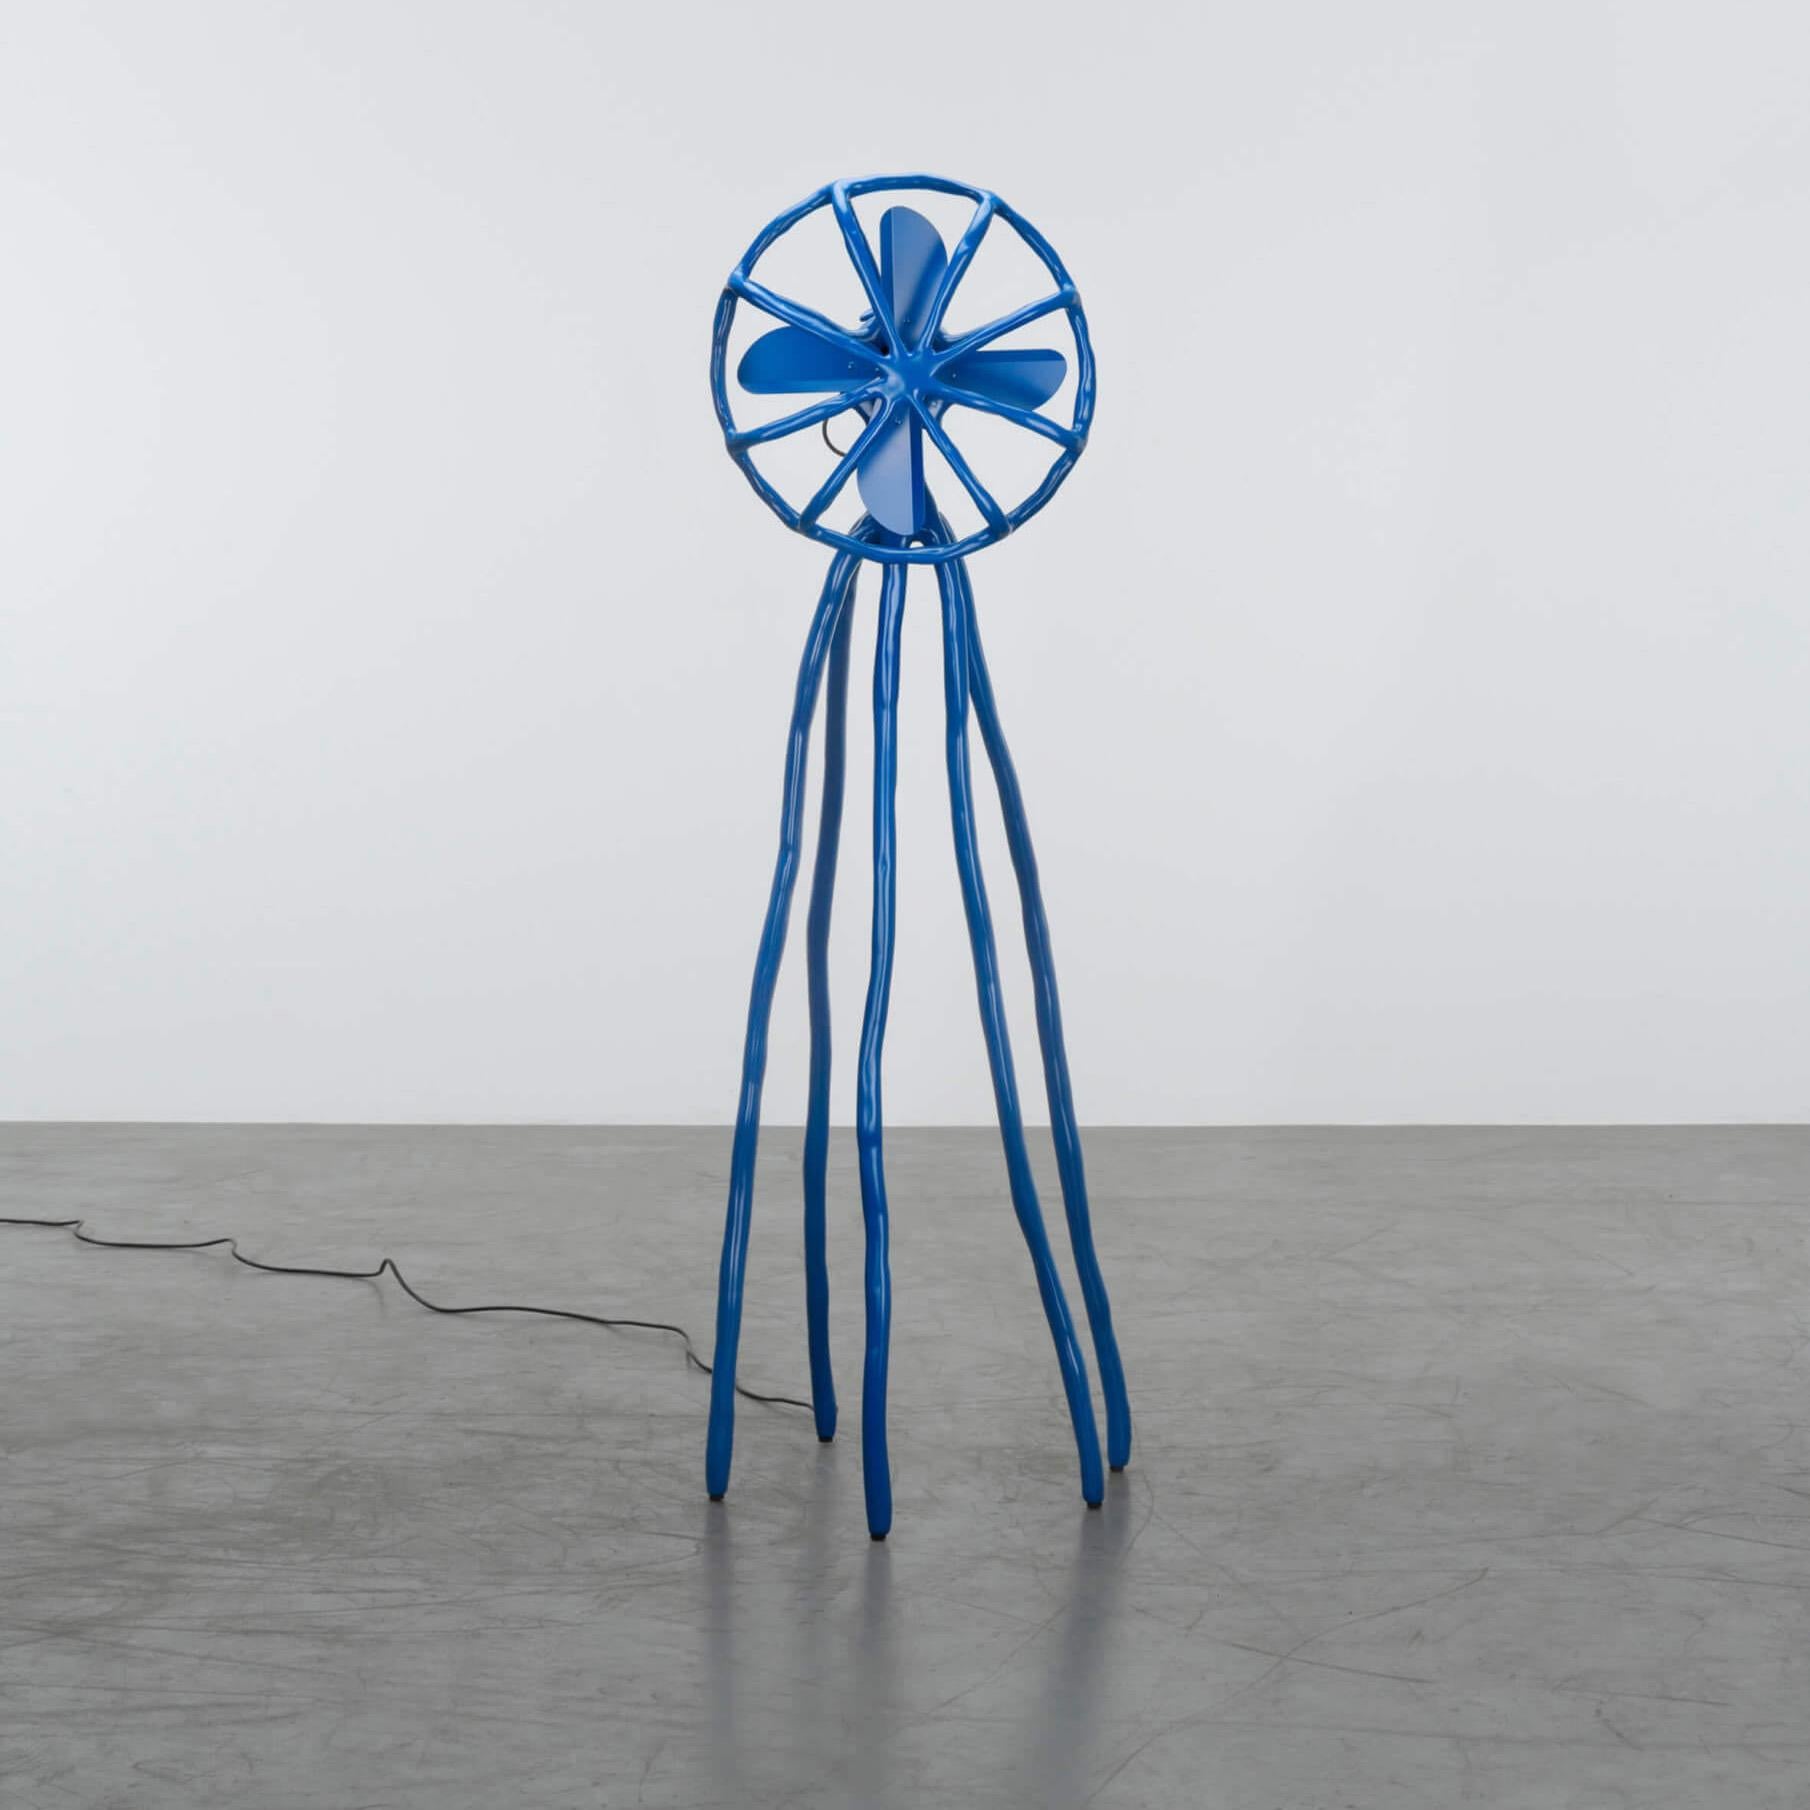 These vibrant Floor fans are from Maarten Baas’s iconic ‘Clay’ collection launched in 2006. The idiosyncratic childishness of this collection is created through Baas’s individual hand modelling of industrial clay around each metal skeleton. The